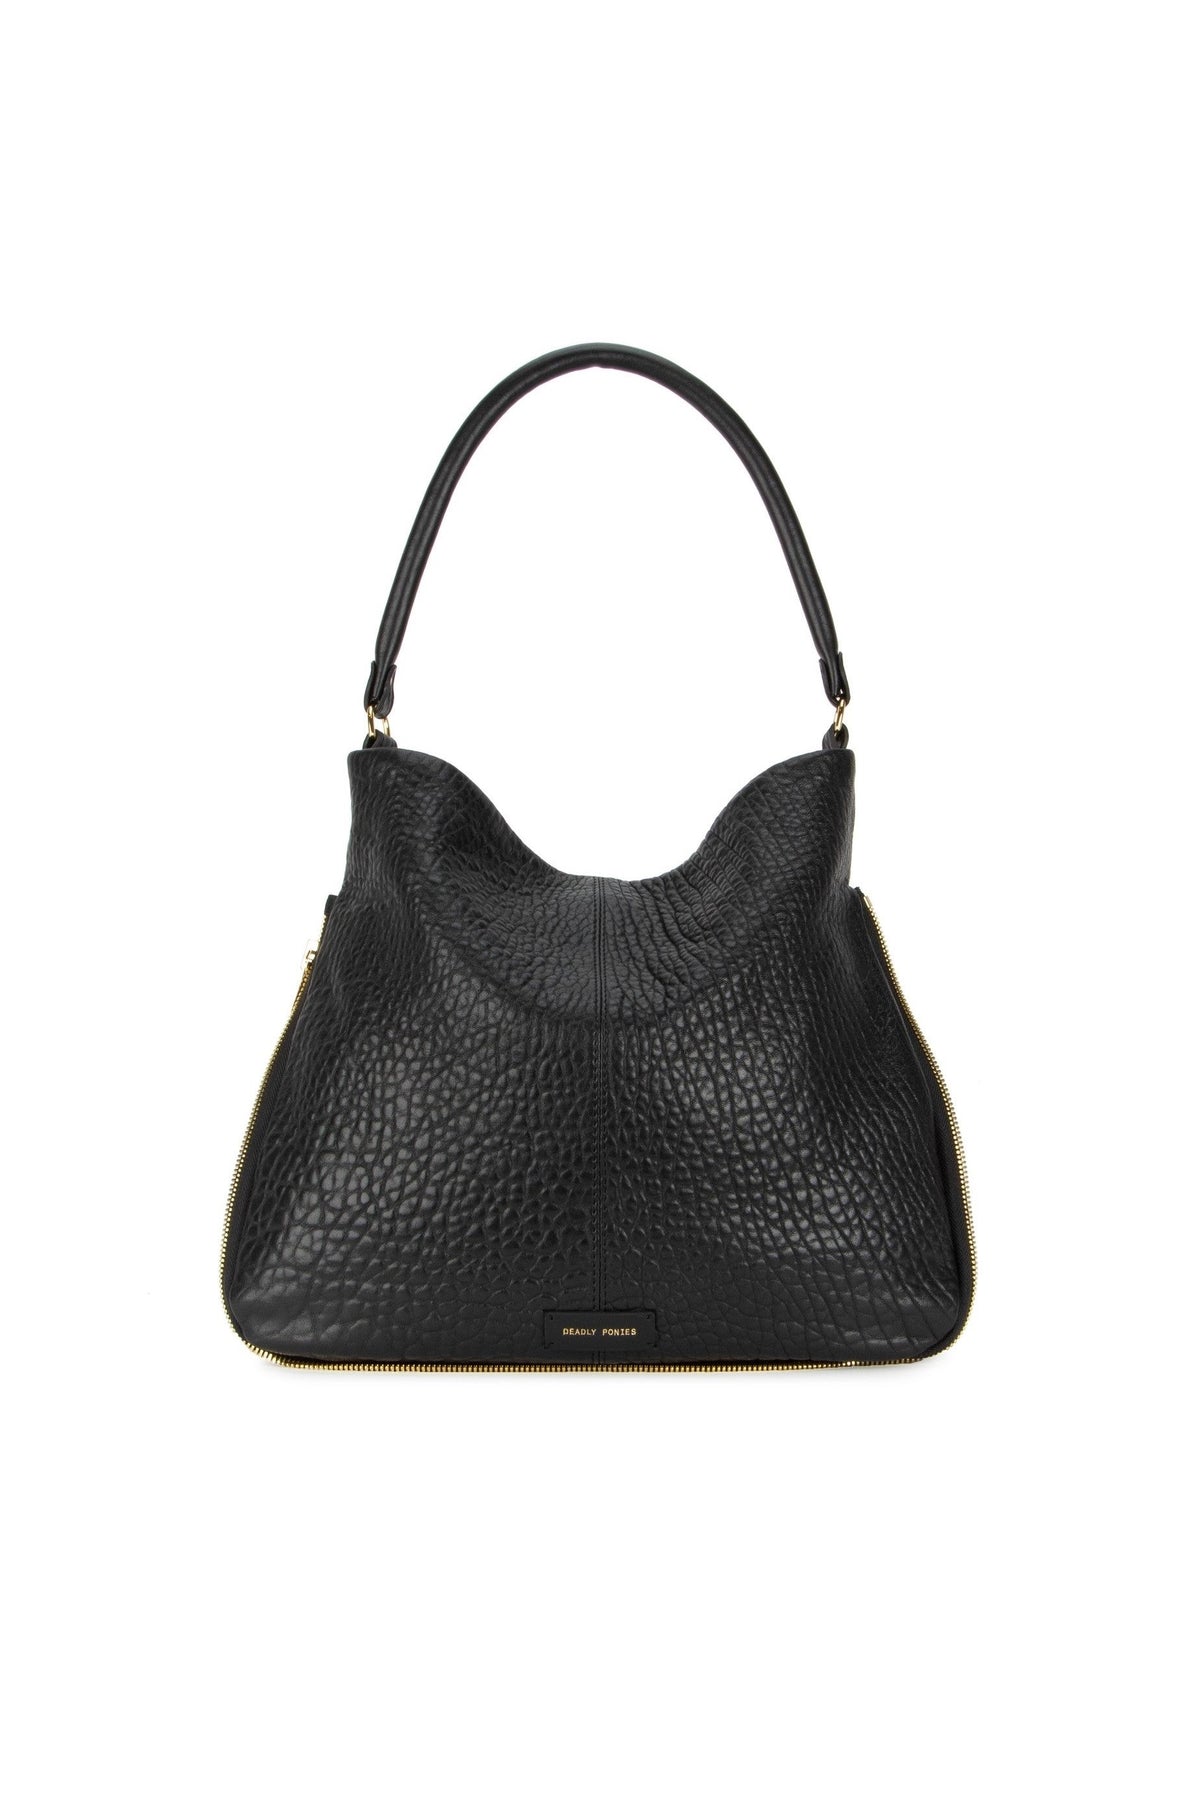 Deadly Ponies Mr Molten Tote  // Bulle  Black